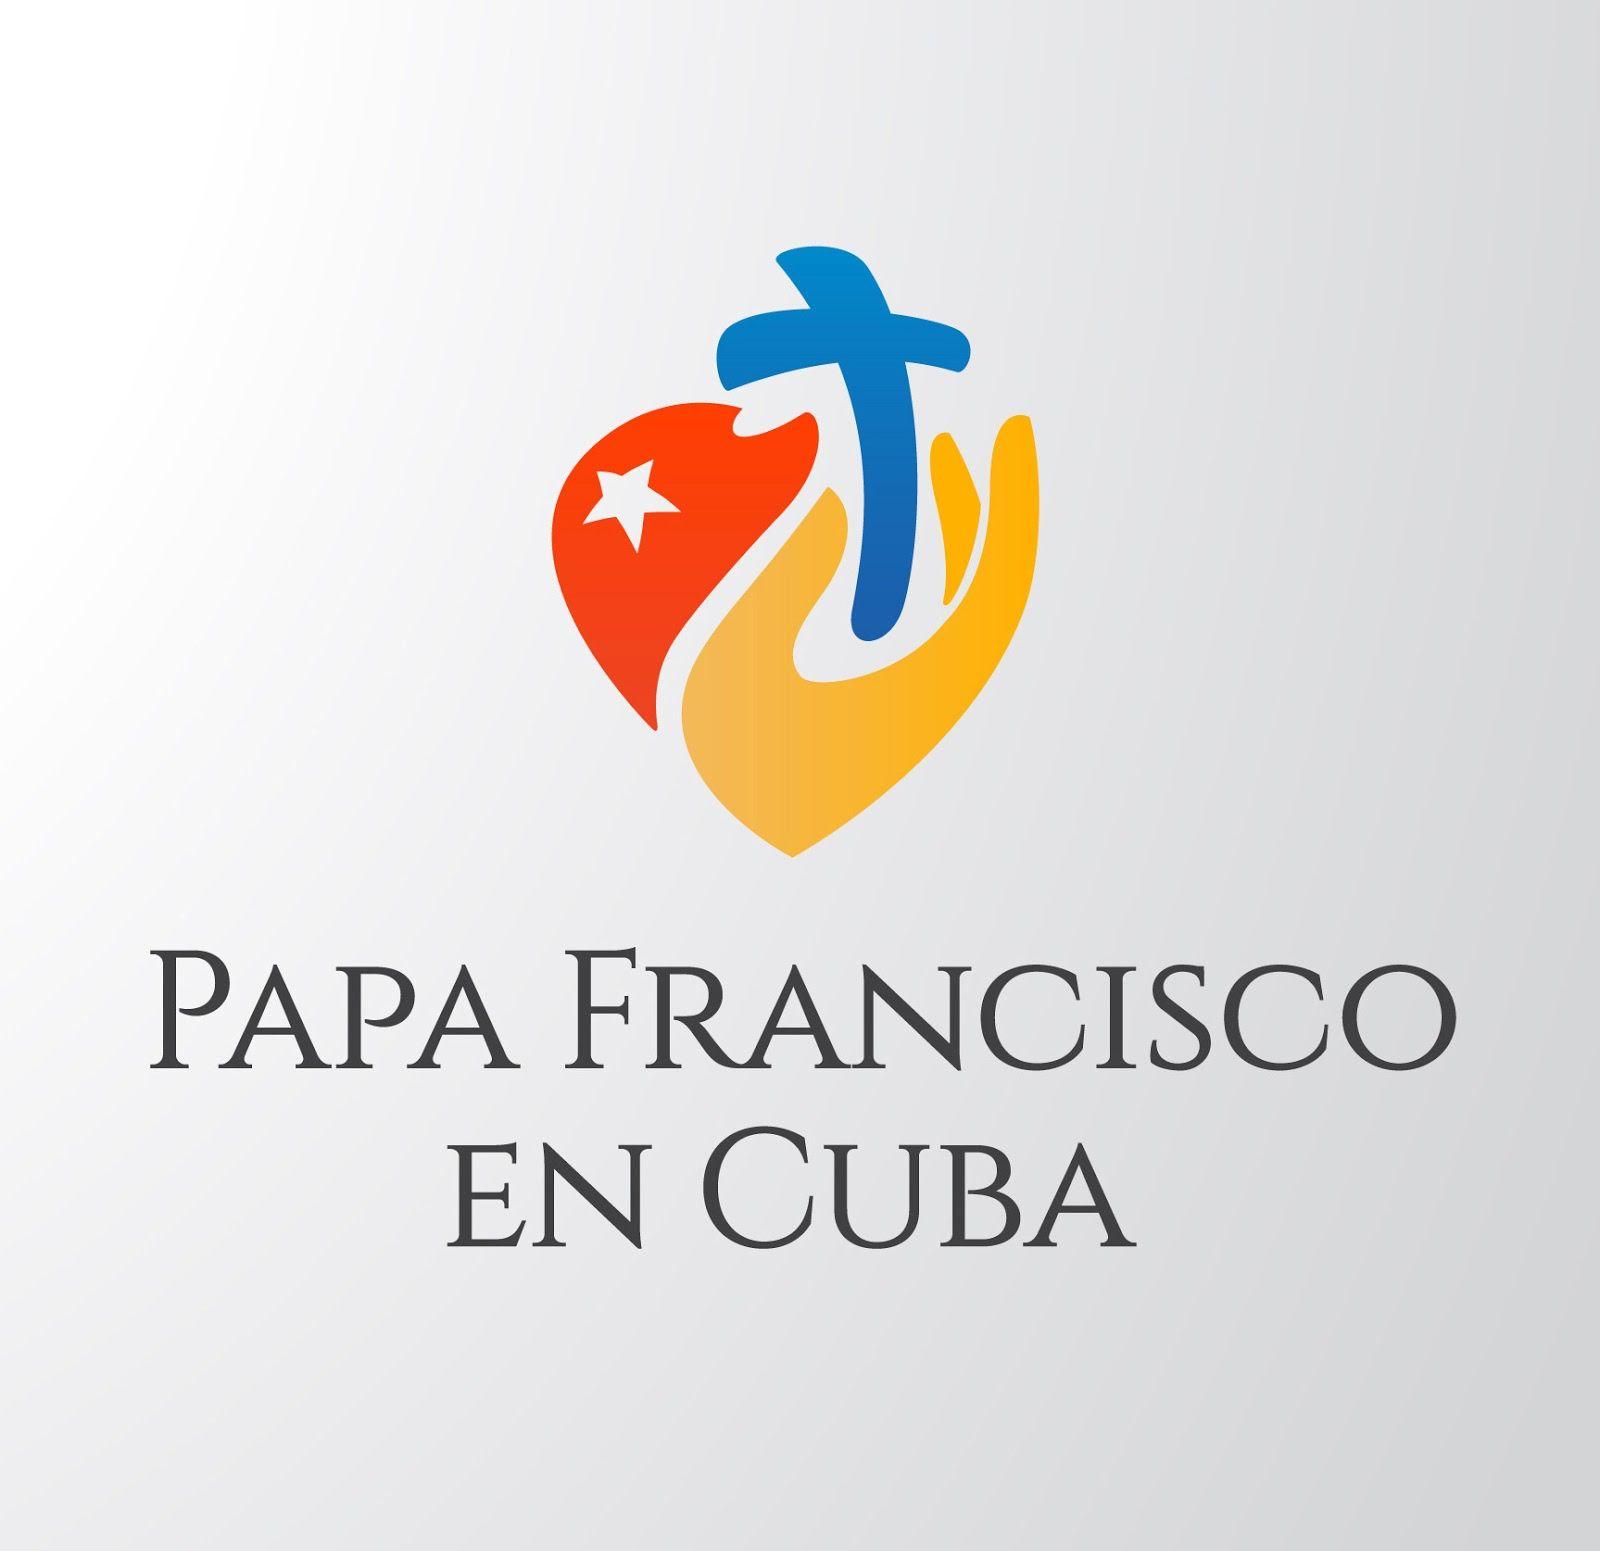 Papal Logo - Logo for Papal Visit to Cuba Released